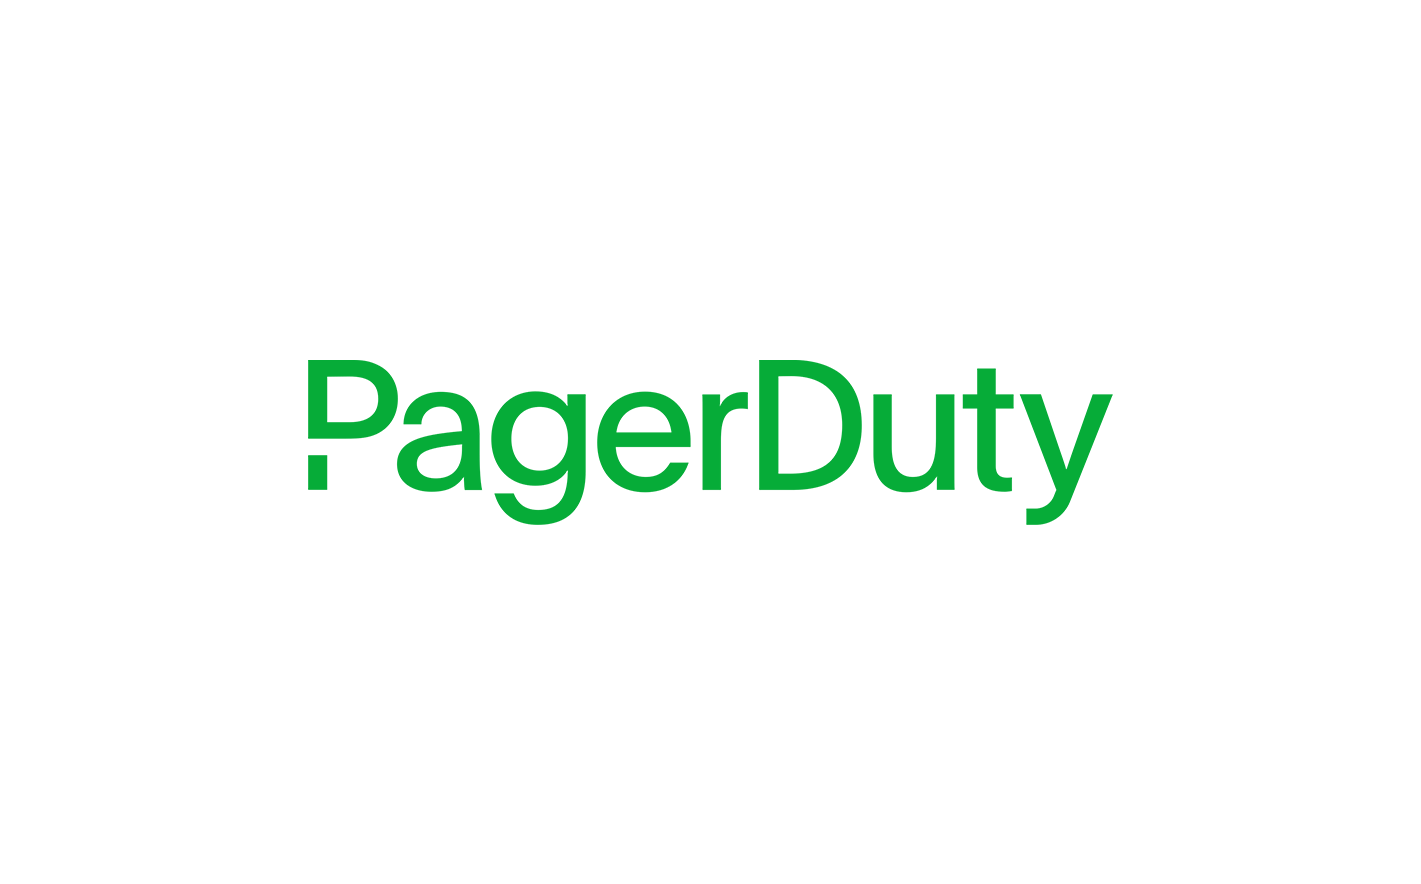 The logo for PagerDuty.